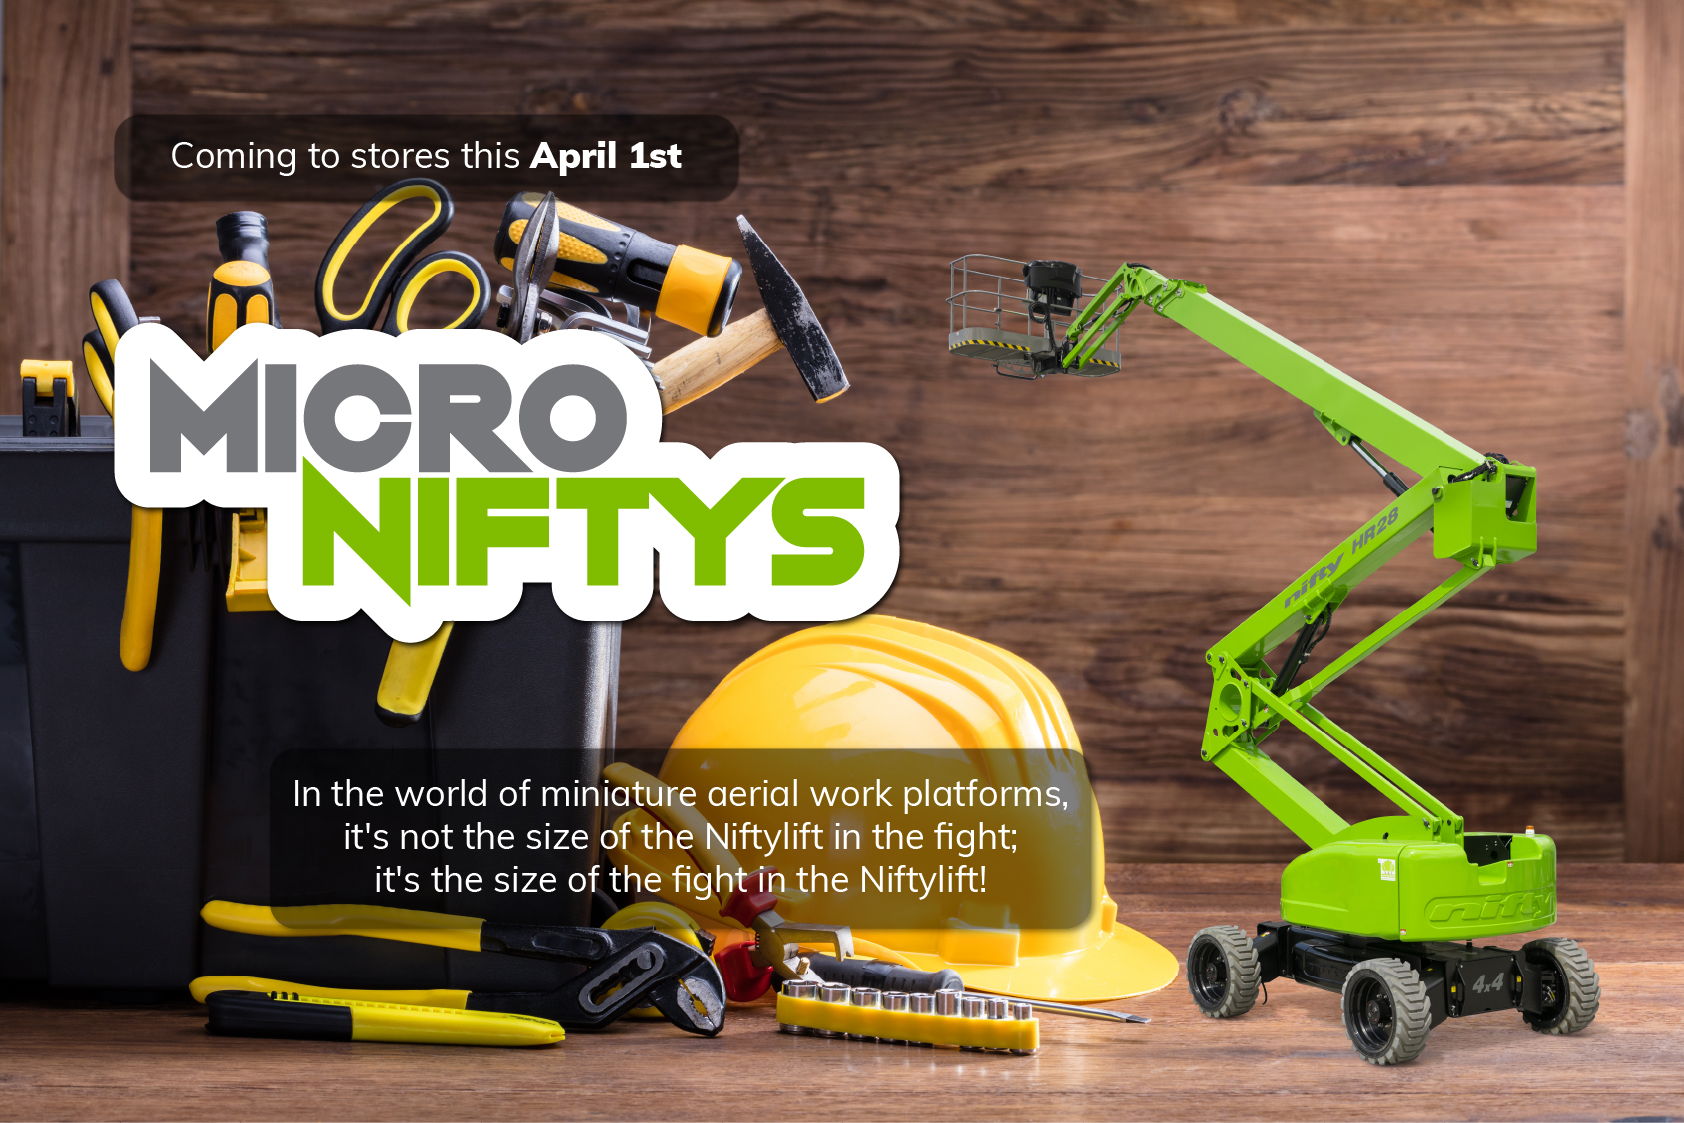 Introducing "MicroNiftys" from Niftylift - Powered by Pym Particles!